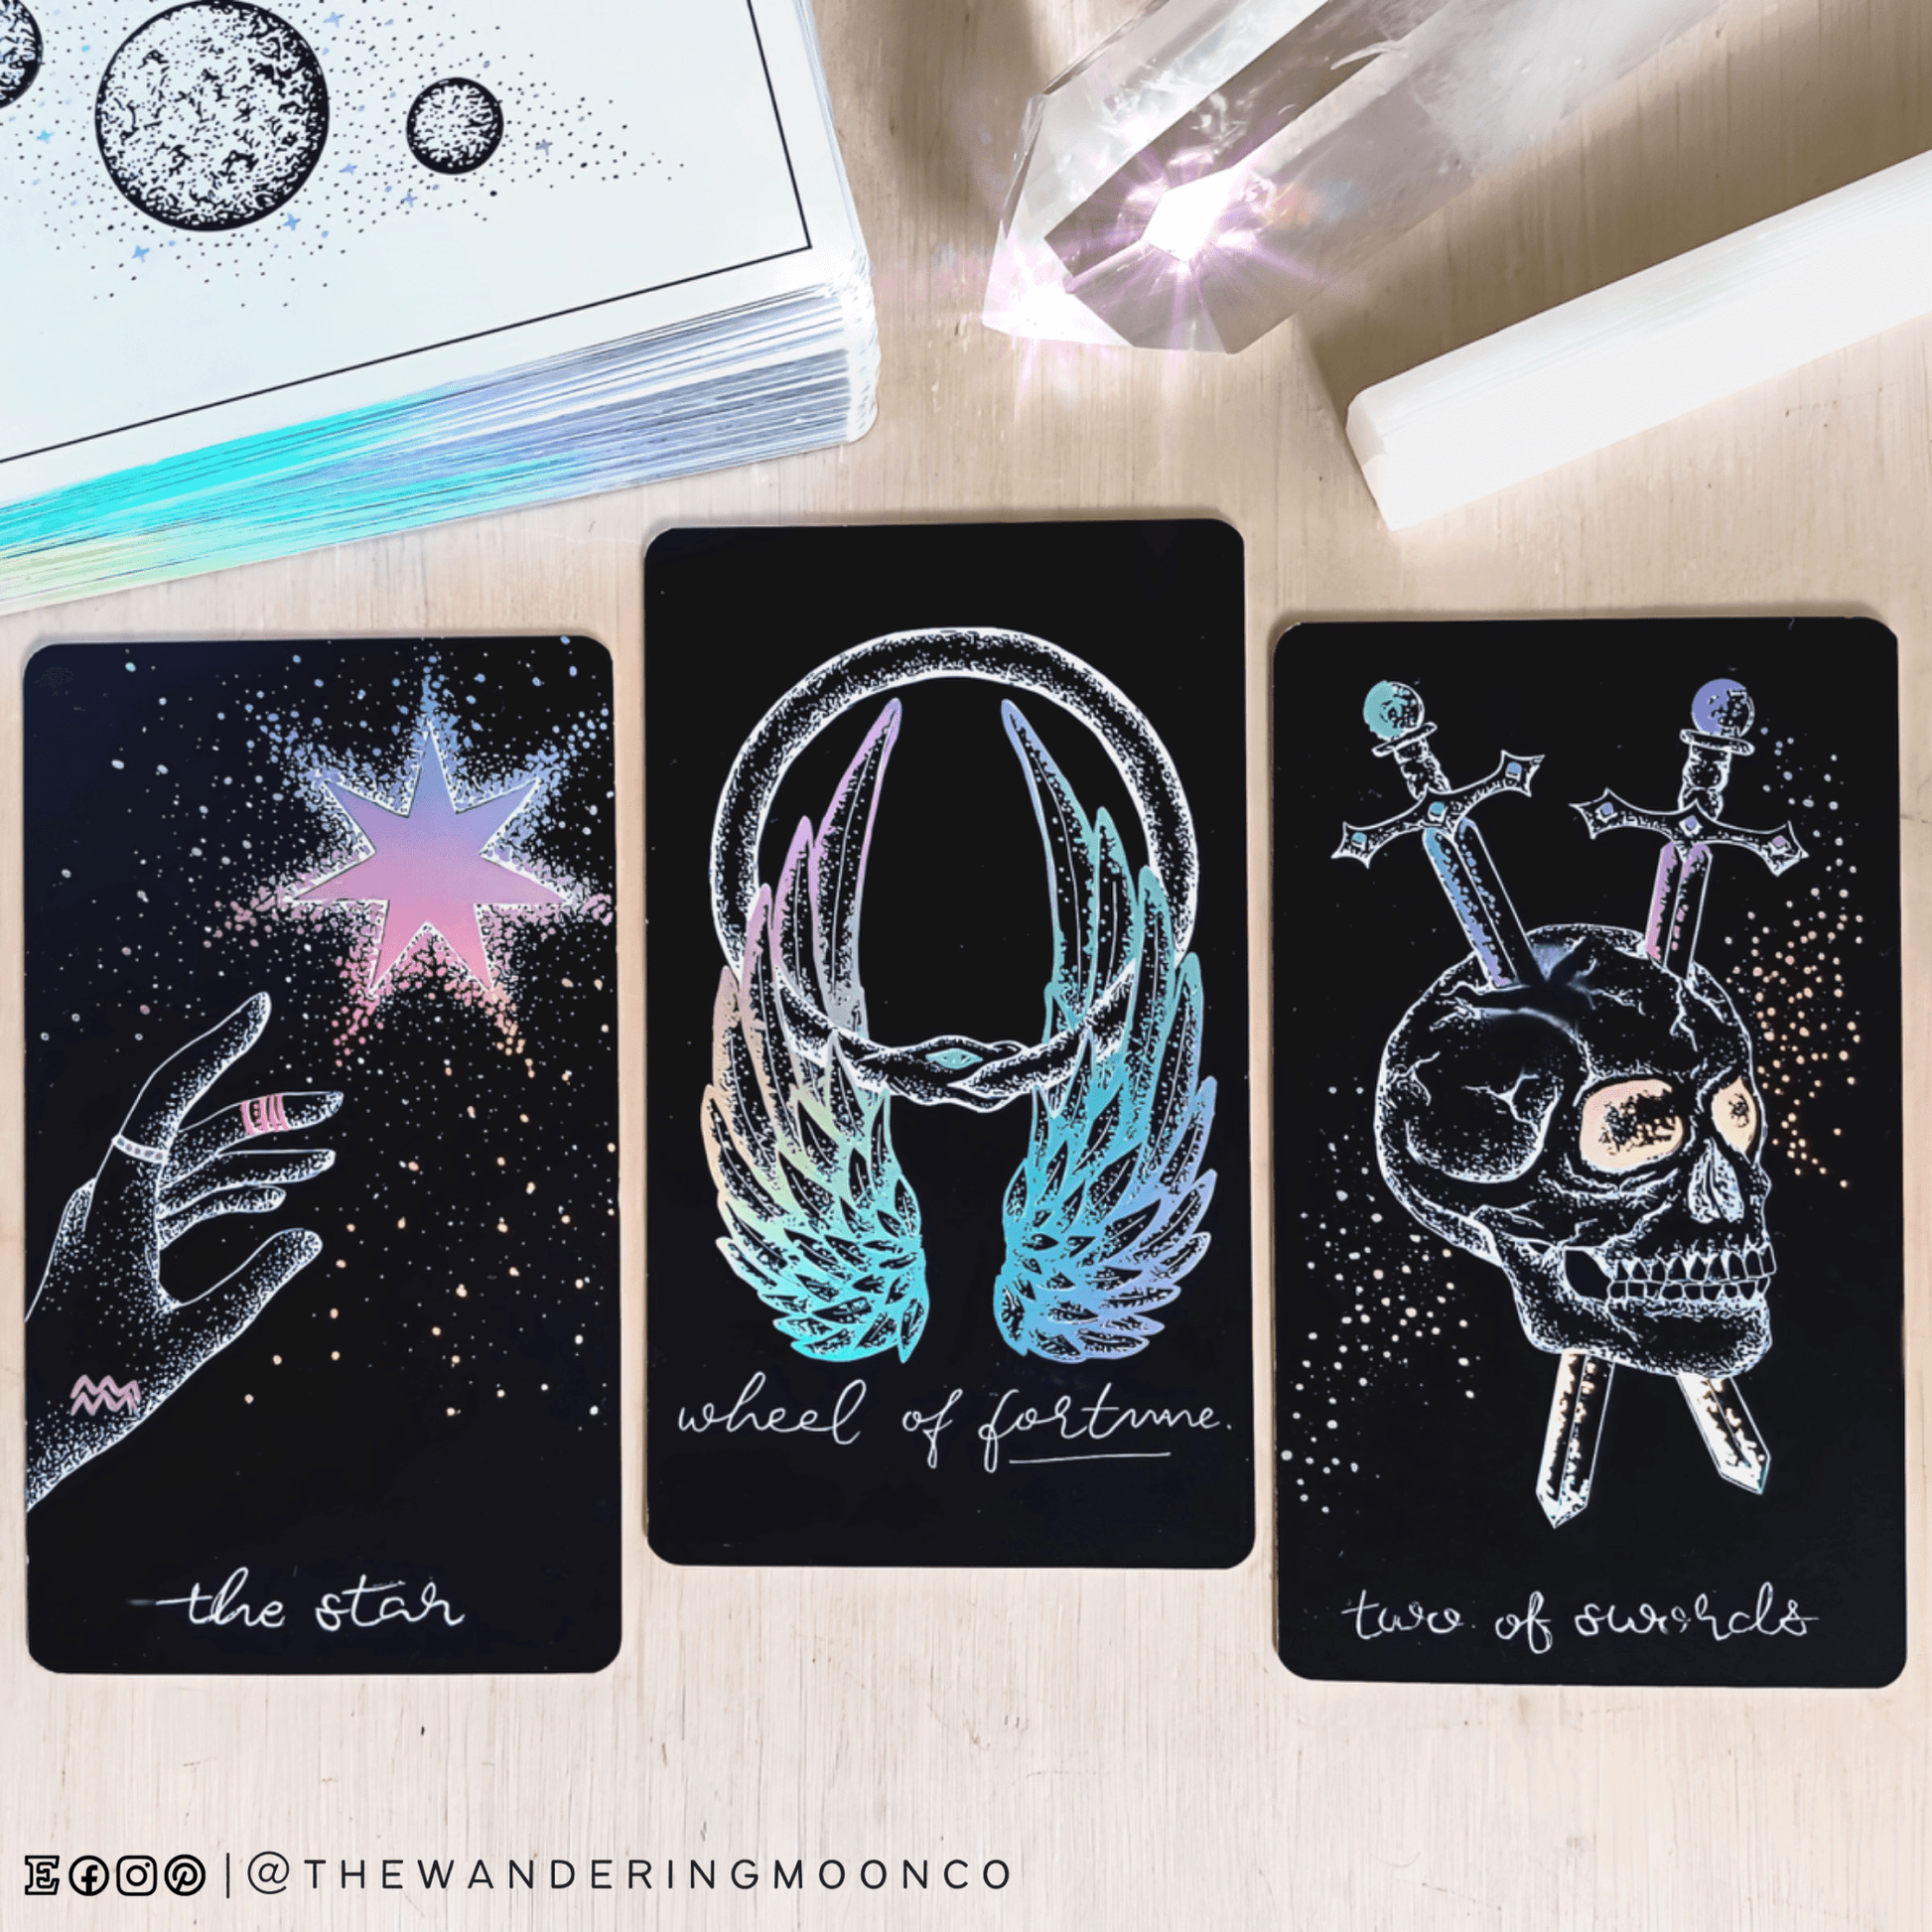 black & white holographic indie tarot cards from  Midnight Sky tarot deck

